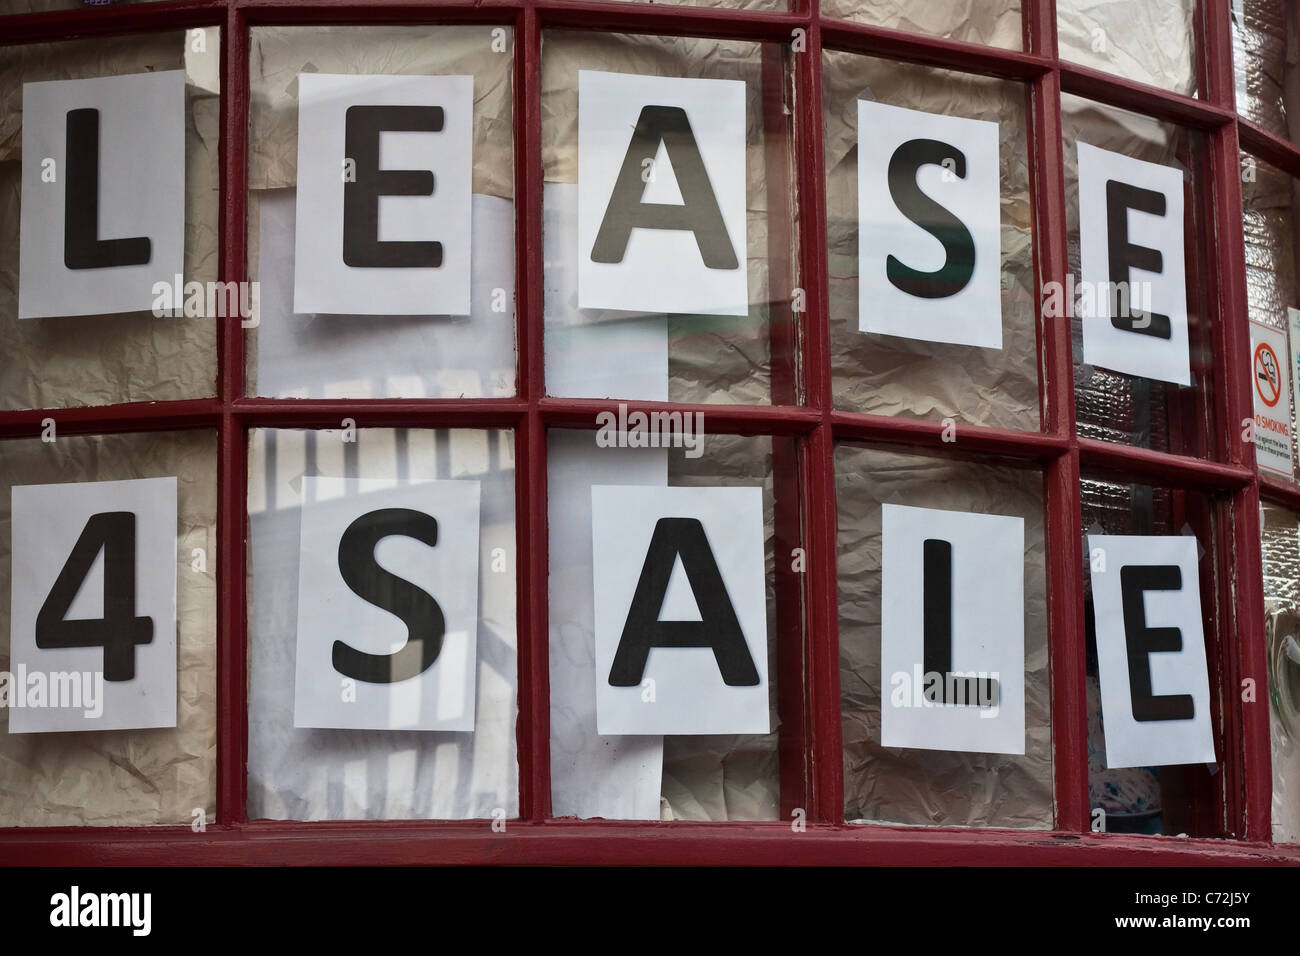 Lease for sale sign in a shop window in UK Stock Photo